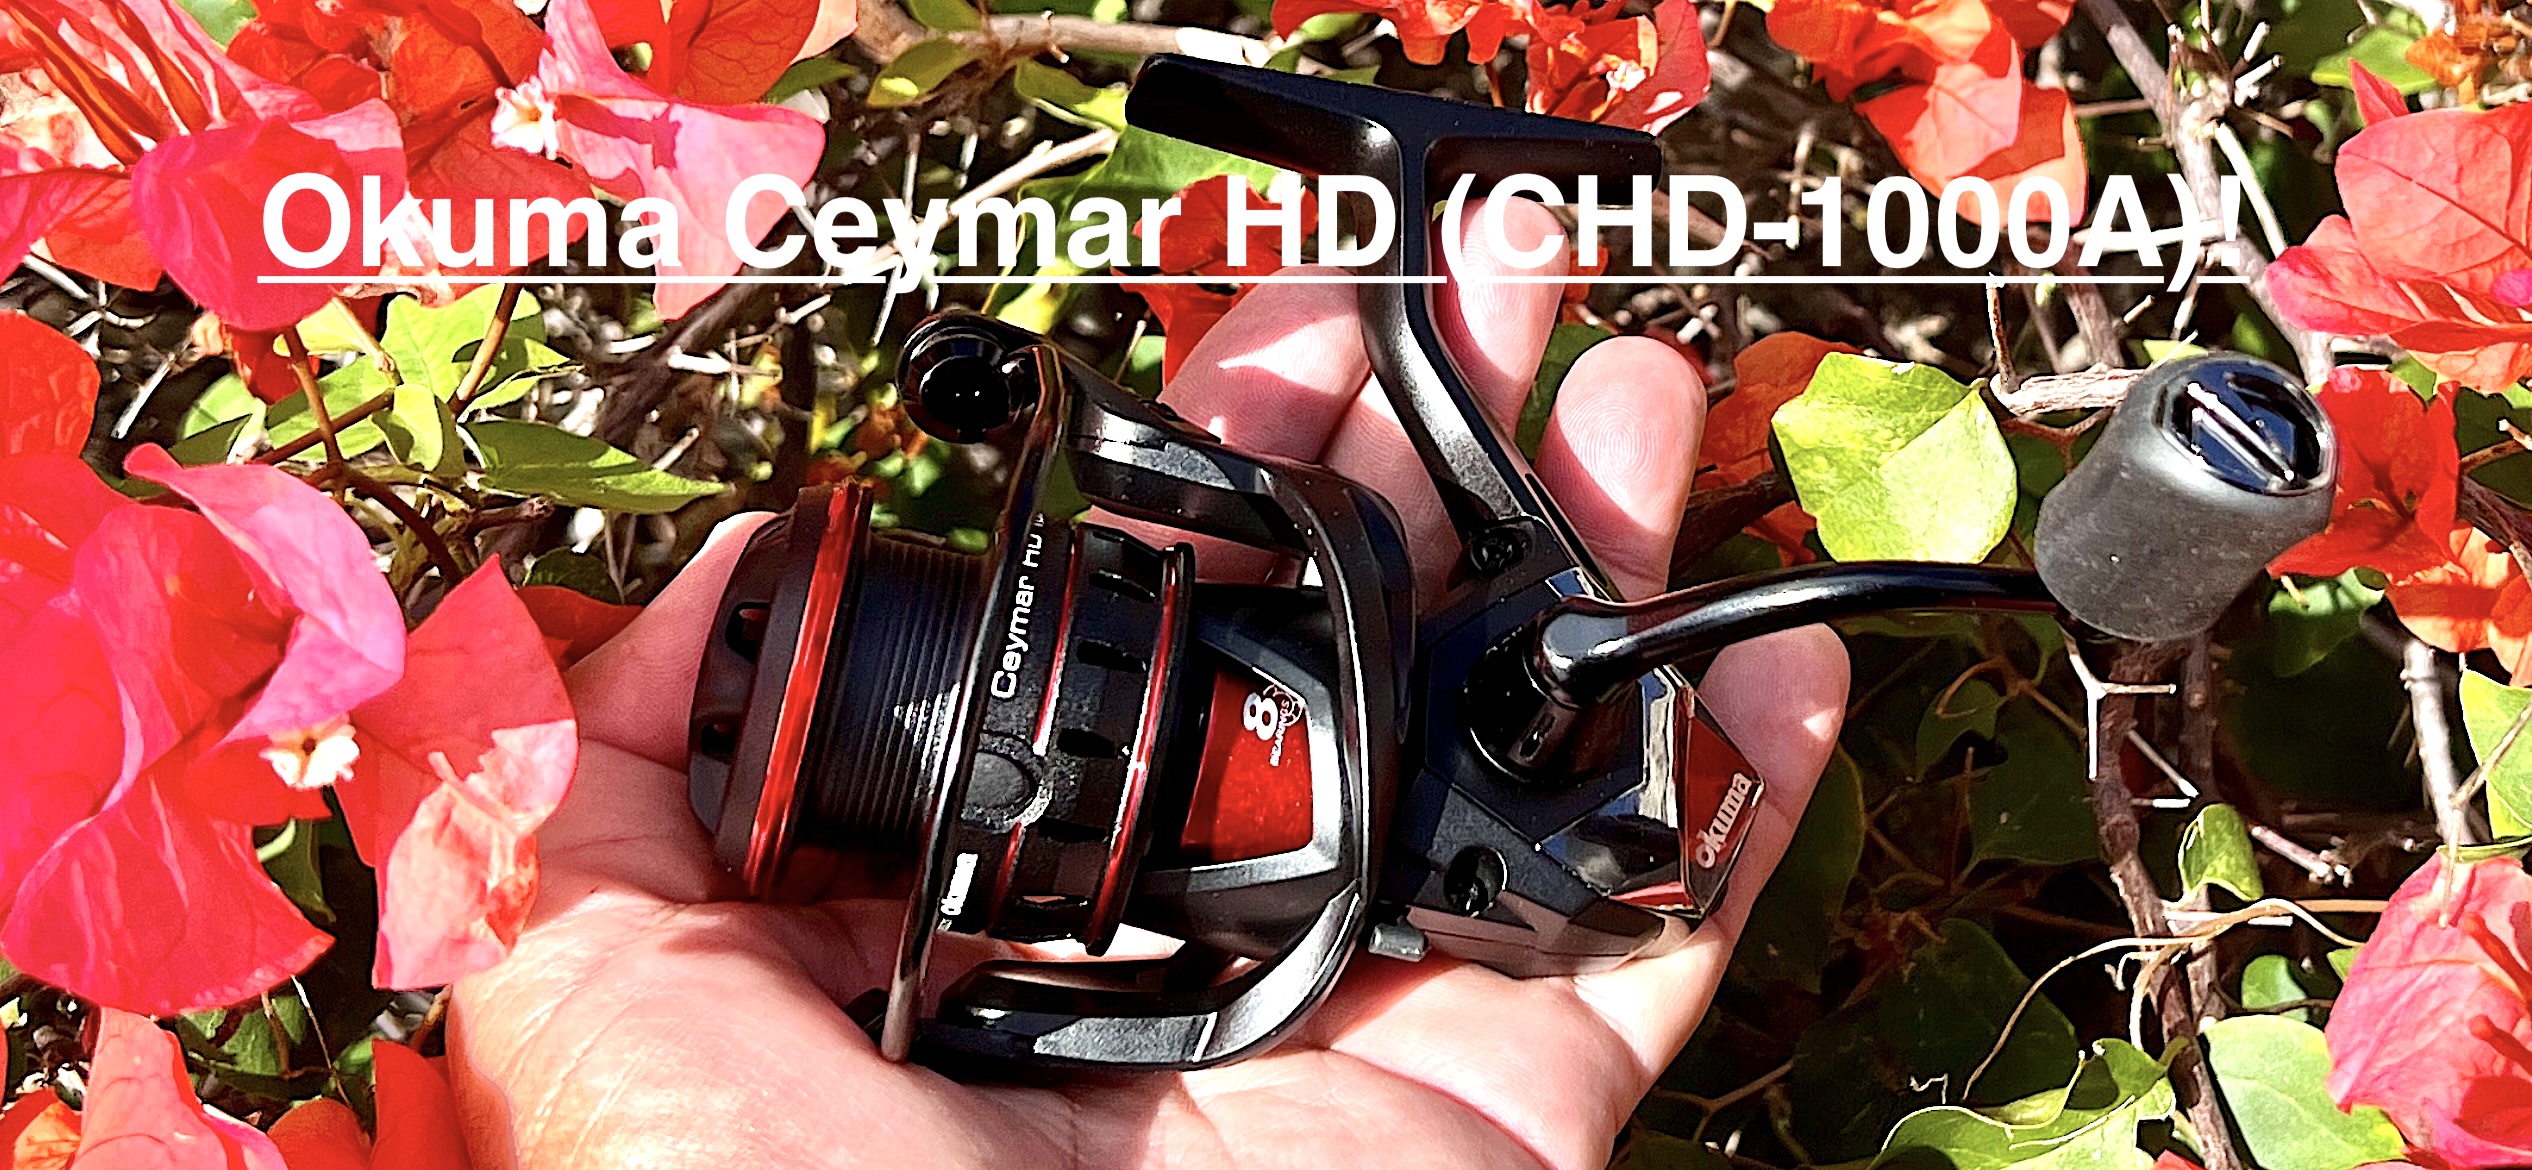 CEYMAR HD! Out Of Box Full On Review!  FishingMagic Forums - sponsored by  Thomas Turner